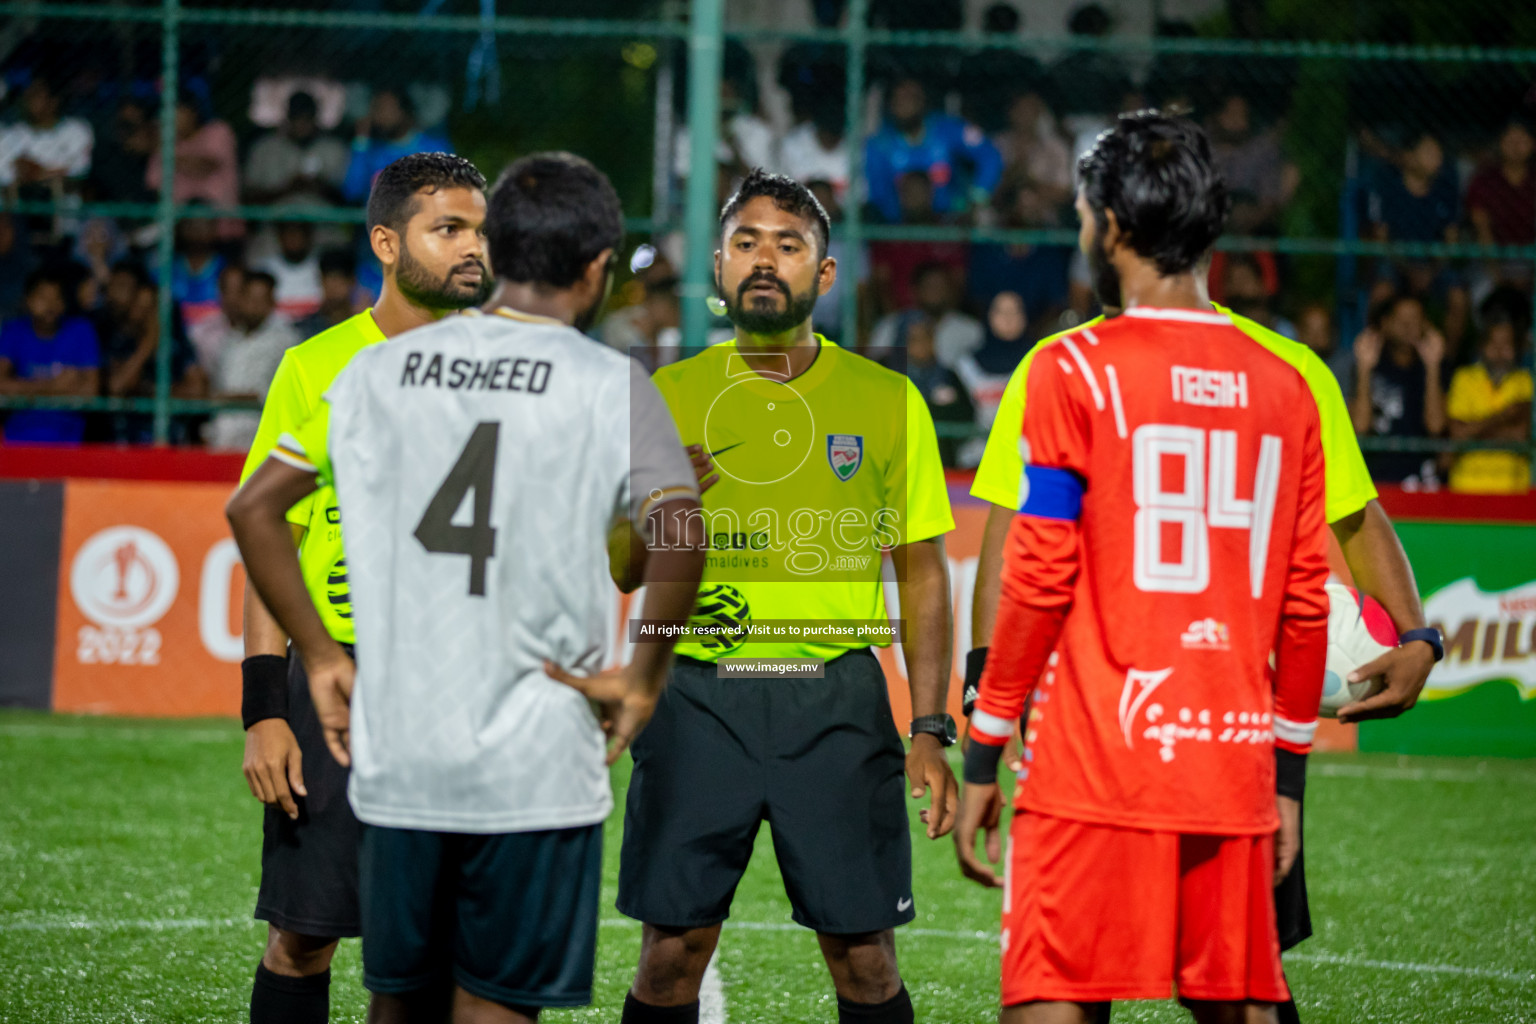 STO RC vs Club Airports in Round of 16 of Club Maldives Cup 2022 was held in Hulhumale', Maldives on Tuesday, 25th October 2022. Hassan Simah / images.mv